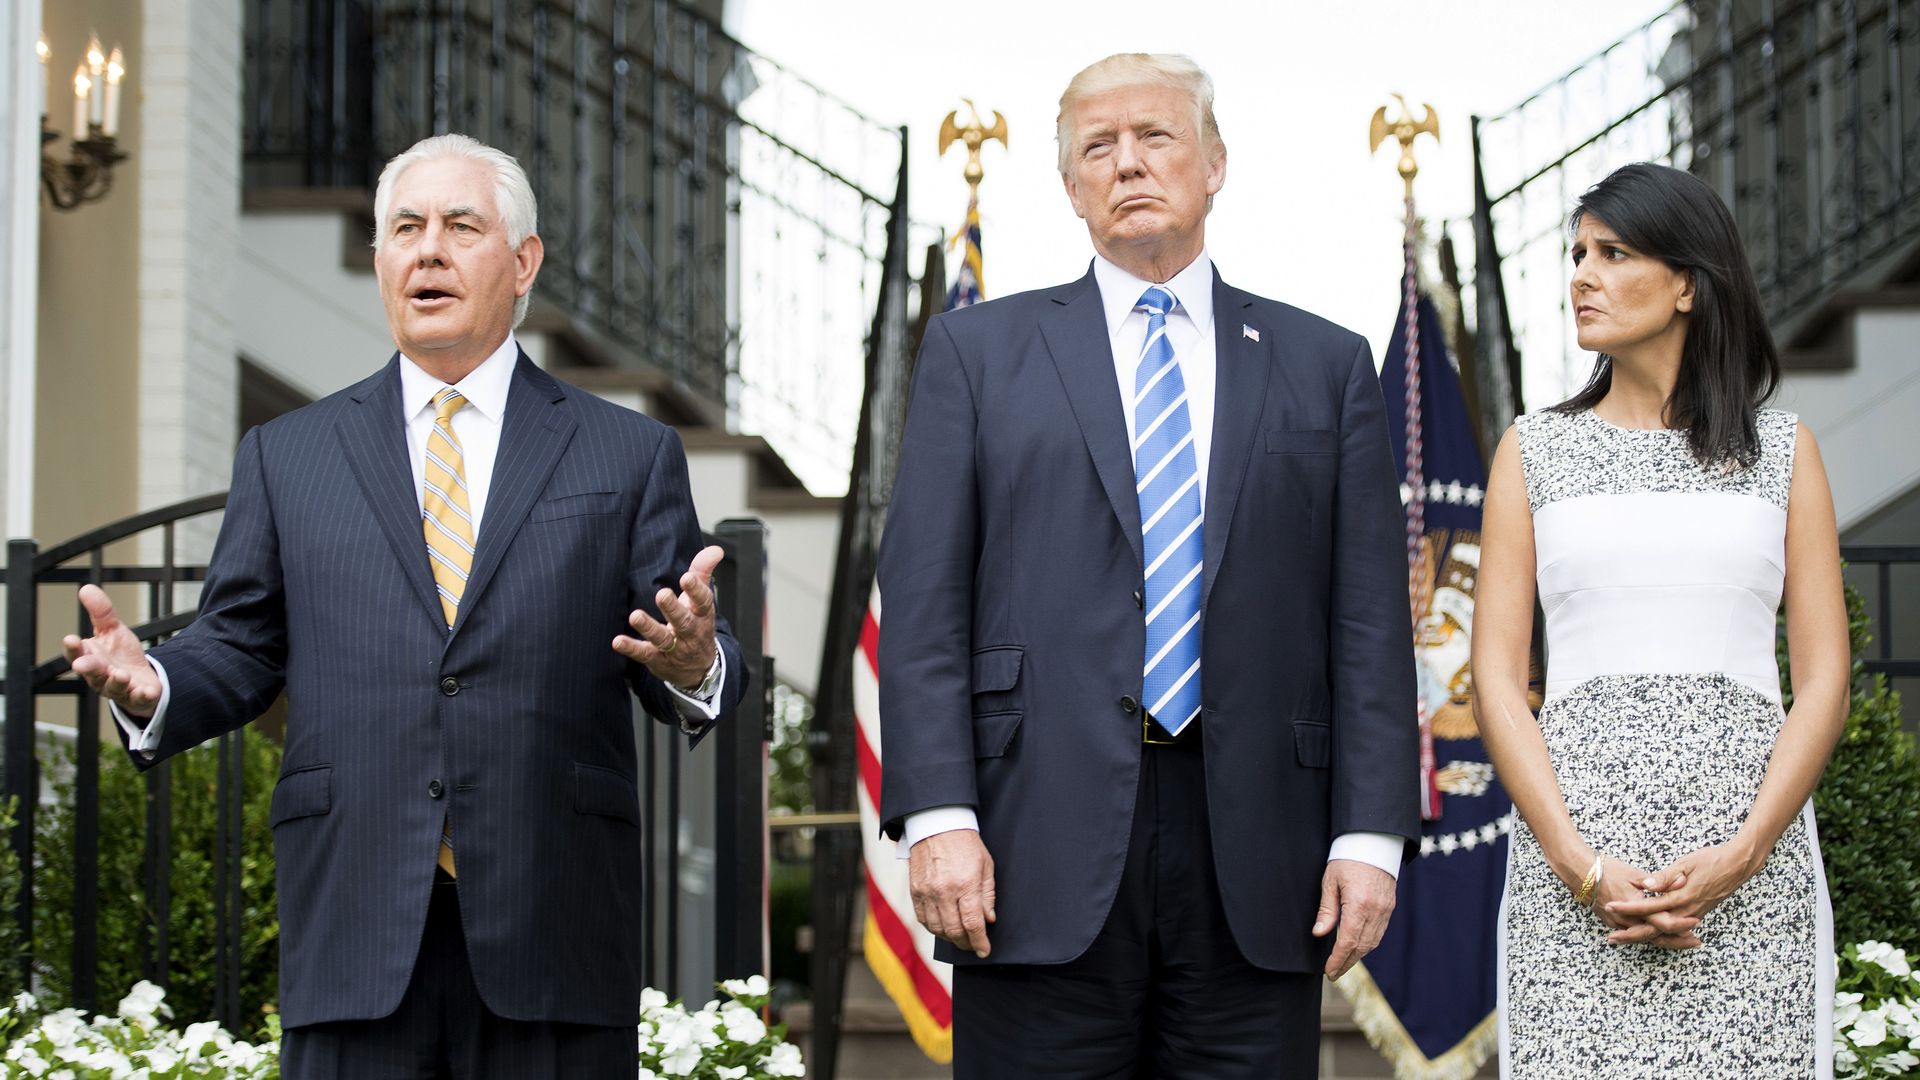 Secretary of State Rex Tillerson (L) speaks to the press with US President Donald Trump (C) and US Ambassador to the United Nations Nikki Haley (R) on August 11, 2017